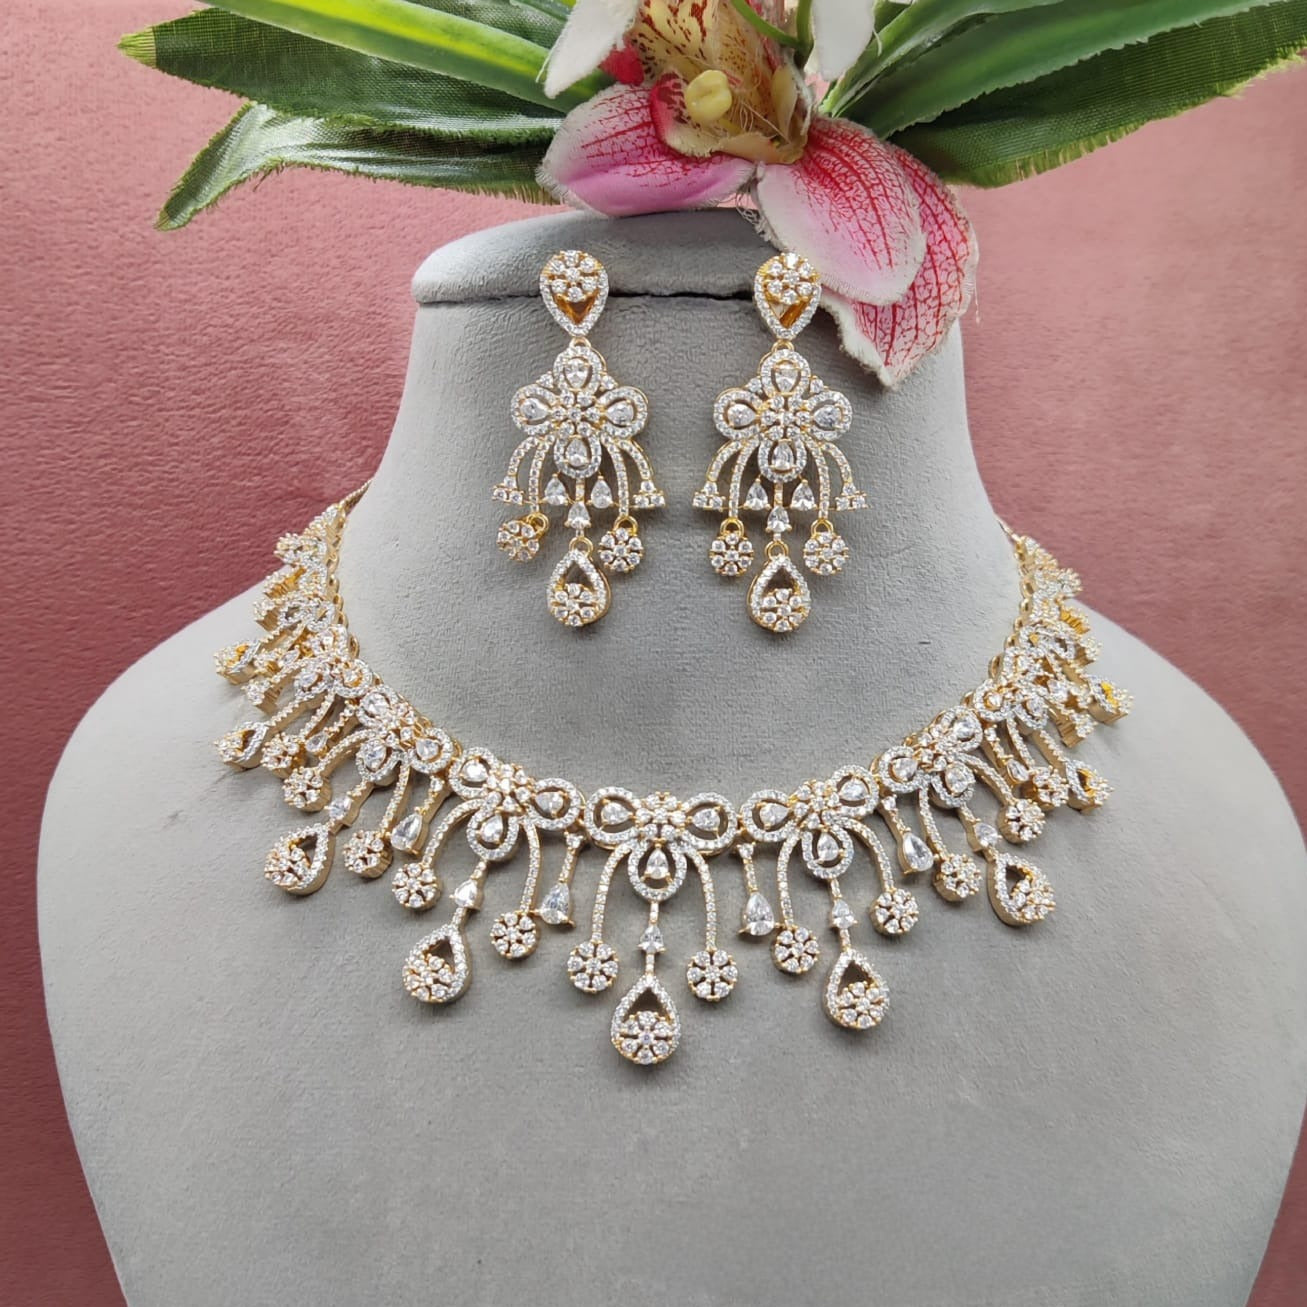 Dazzling Elegance: American Diamond Small Necklace for Your Wedding Ensemble